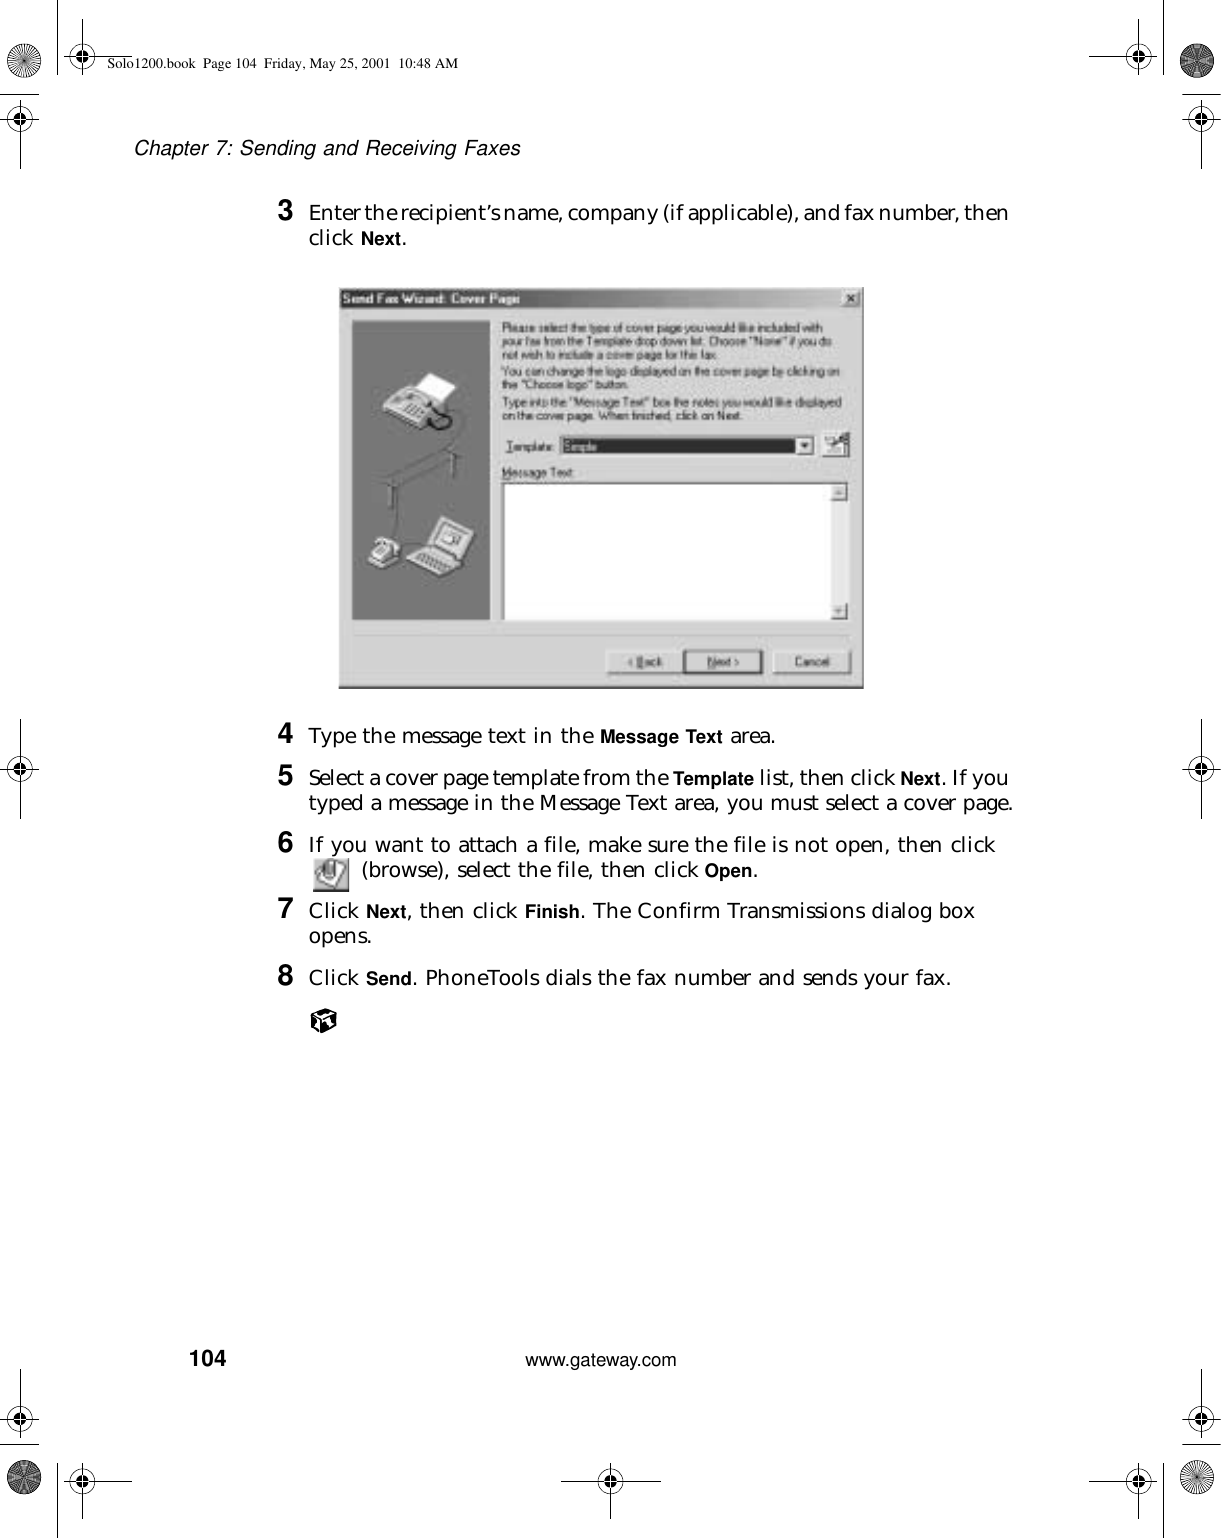 104Chapter 7: Sending and Receiving Faxeswww.gateway.com3Enter the recipient’s name, company (if applicable), and fax number, then click Next.4Type the message text in the Message Text area.5Select a cover page template from the Template list, then click Next. If you typed a message in the Message Text area, you must select a cover page.6If you want to attach a file, make sure the file is not open, then click  (browse), select the file, then click Open.7Click Next, then click Finish. The Confirm Transmissions dialog box opens.8Click Send. PhoneTools dials the fax number and sends your fax.Solo1200.book Page 104 Friday, May 25, 2001 10:48 AM